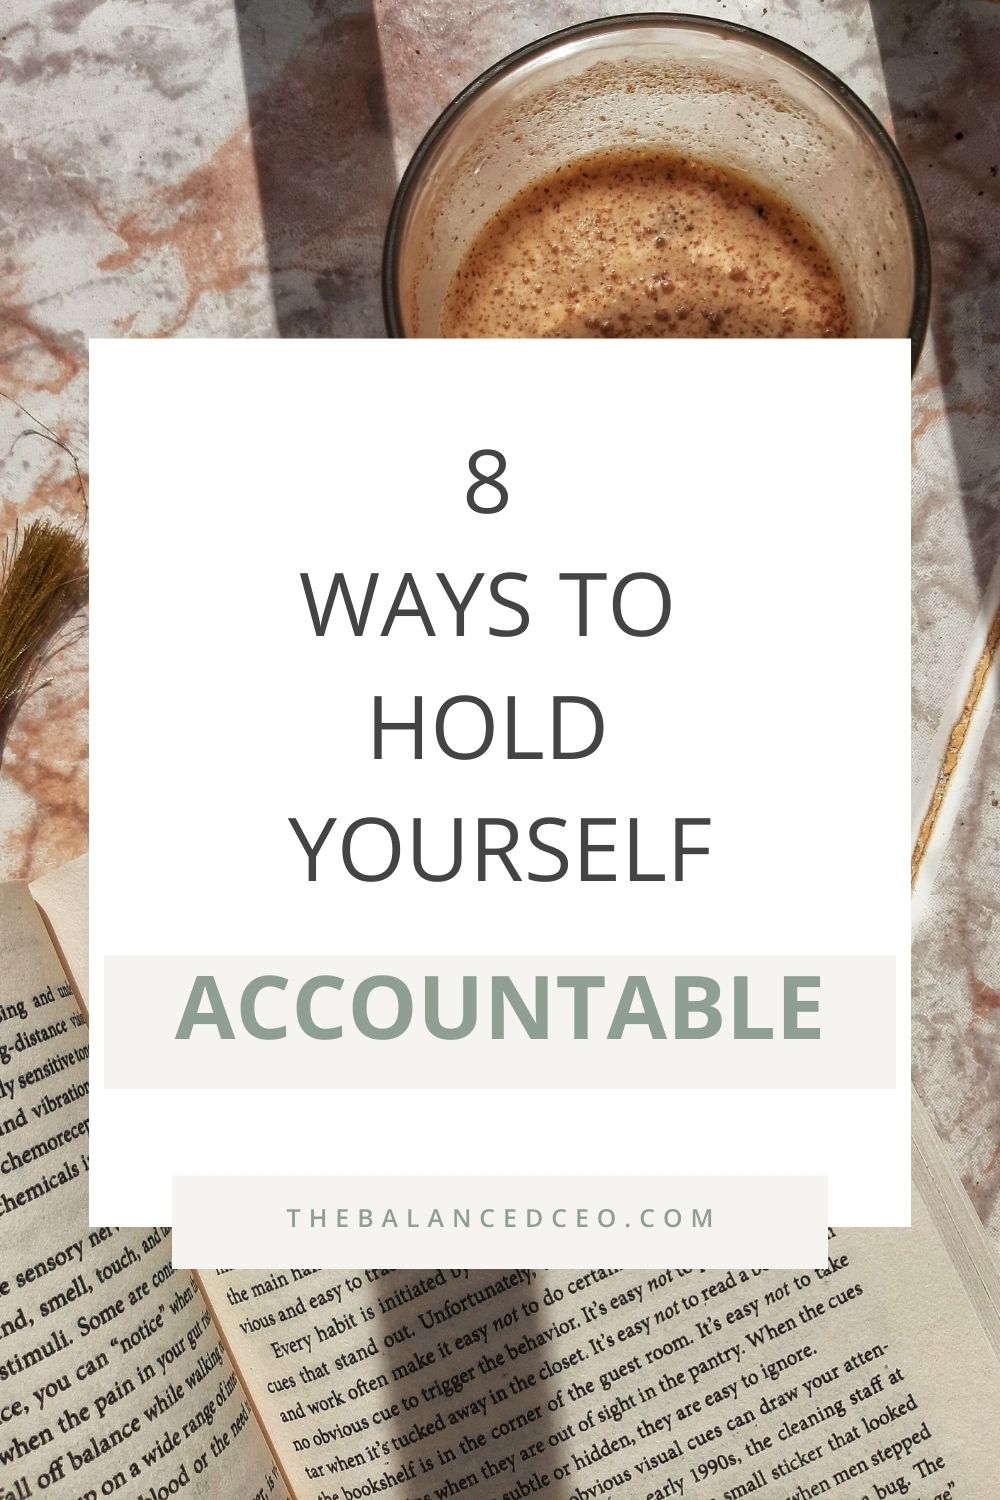 8 Ways to Hold Yourself Accountable